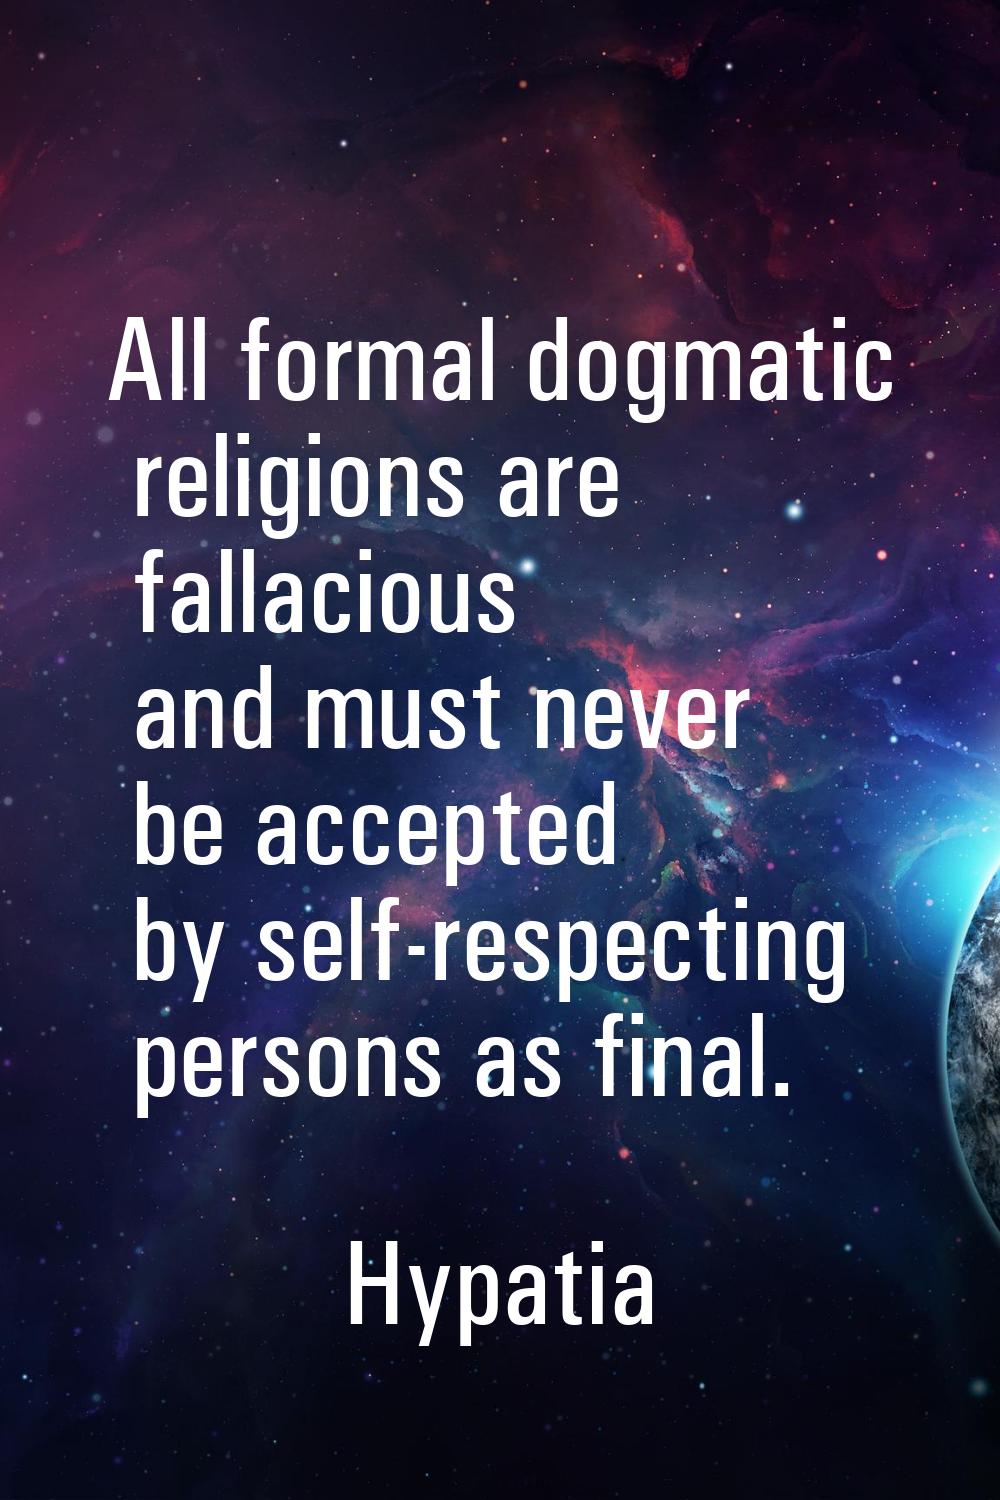 All formal dogmatic religions are fallacious and must never be accepted by self-respecting persons 